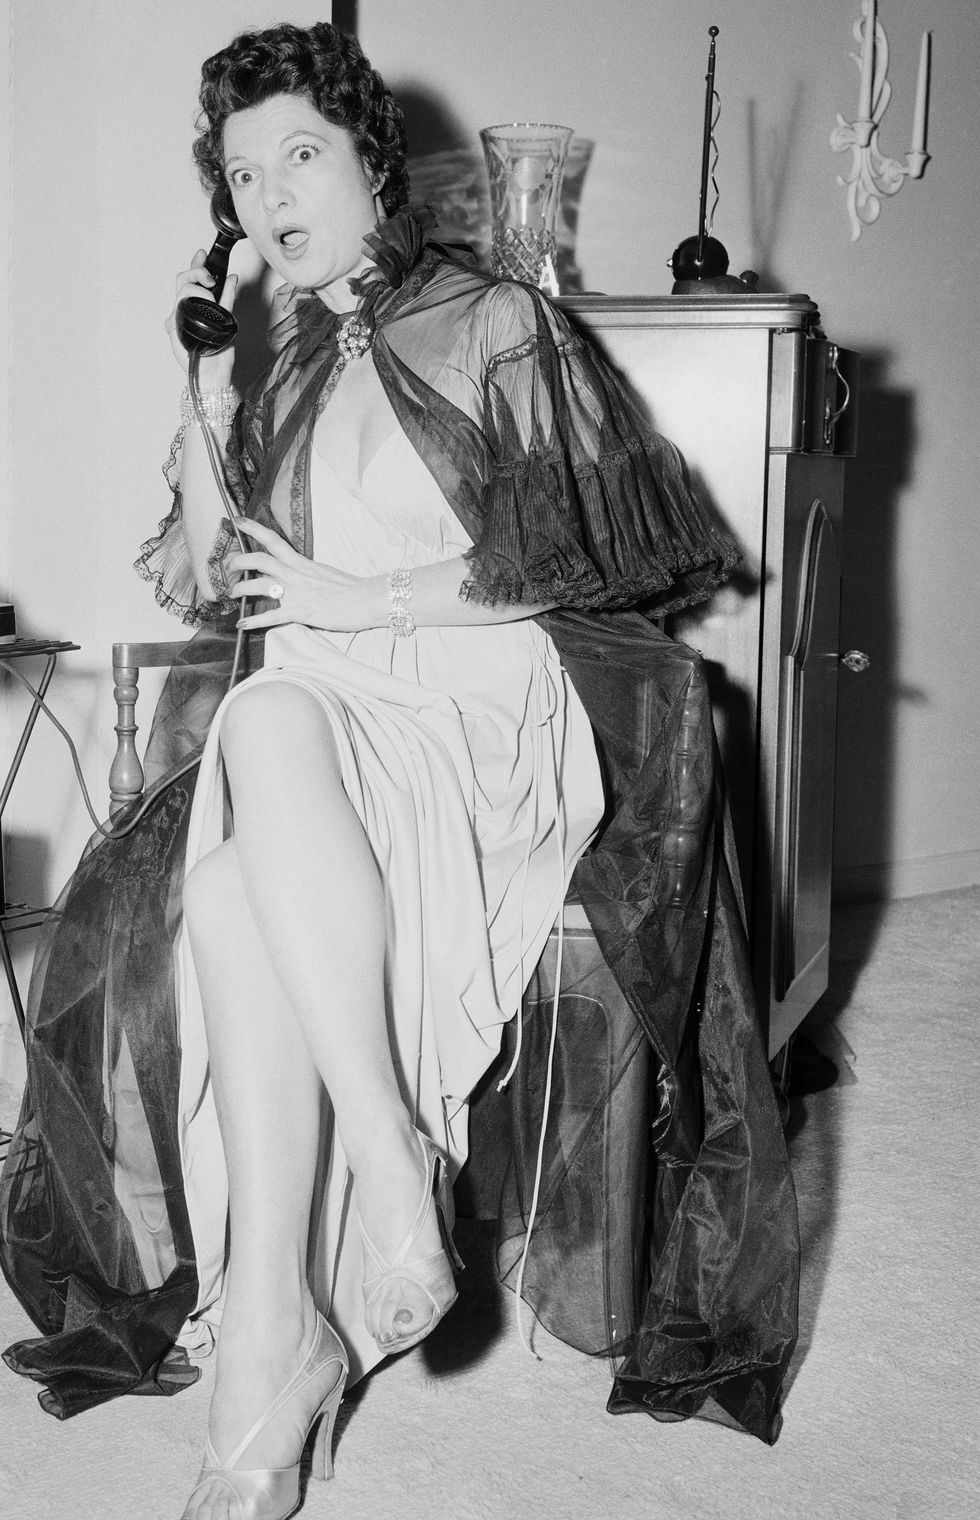 A woman in theatrical garb appears shocked by what she is hearing over a telephone.